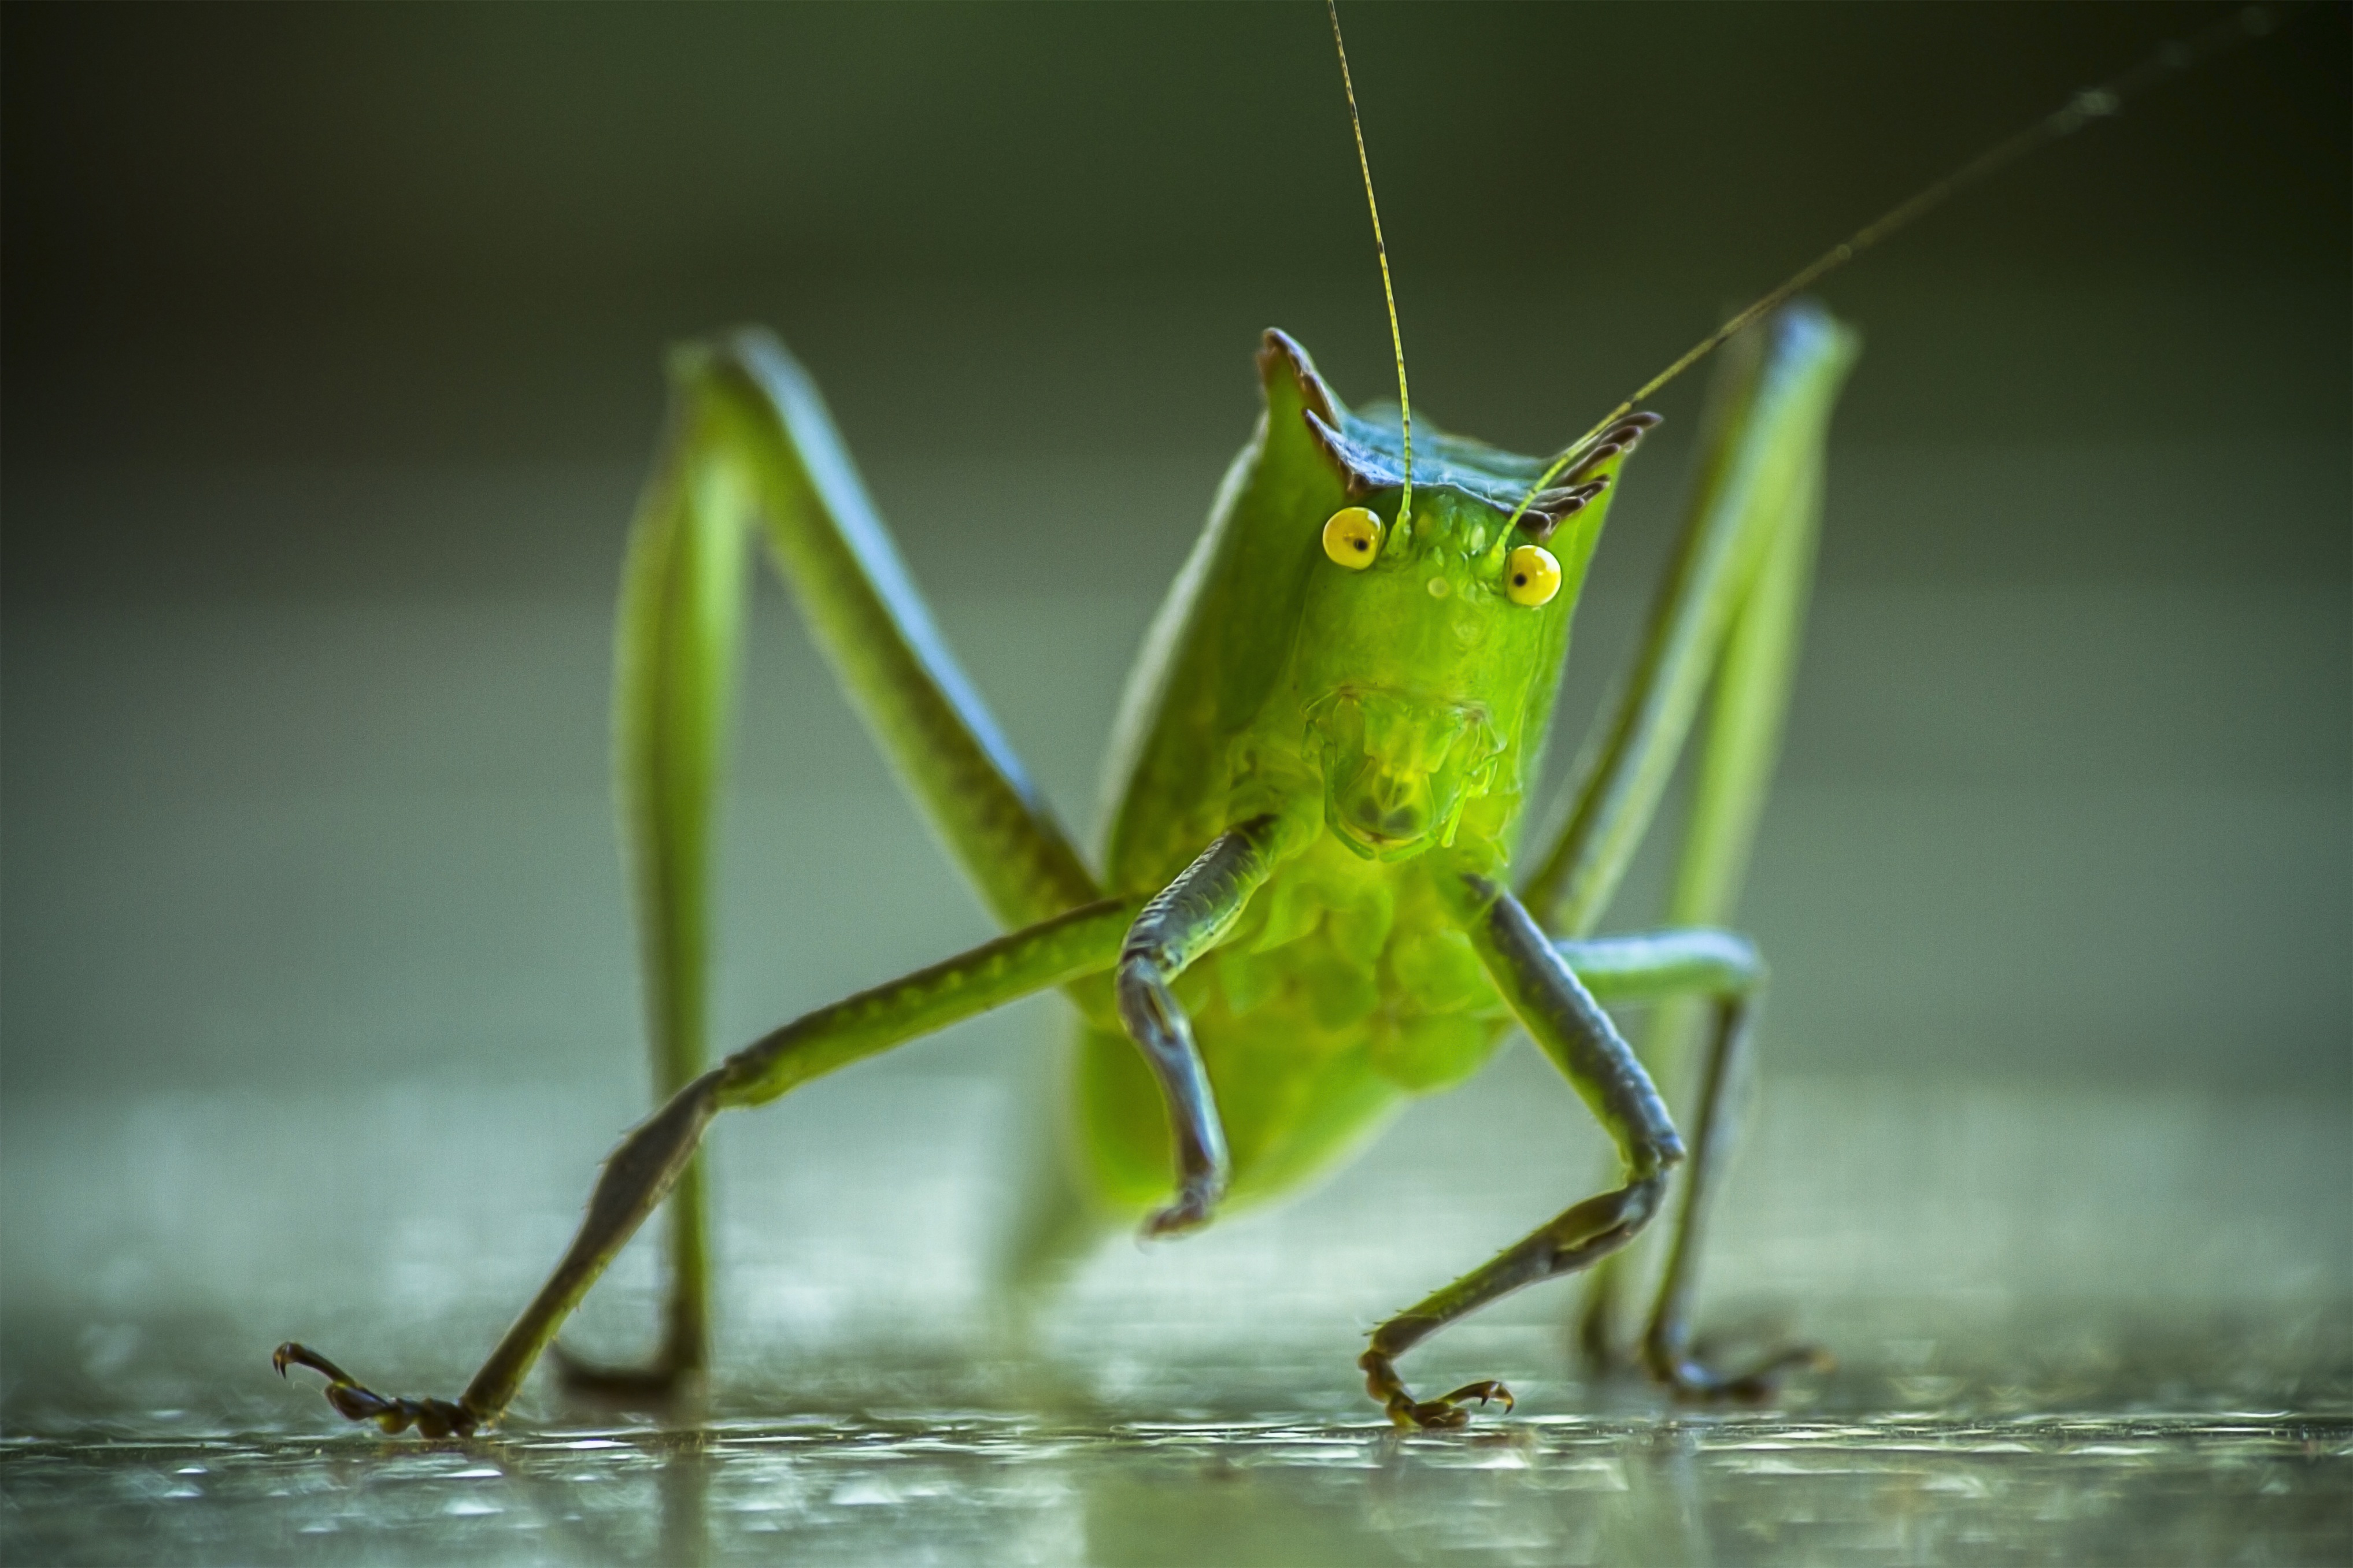 Close up of a katydid or nsenene